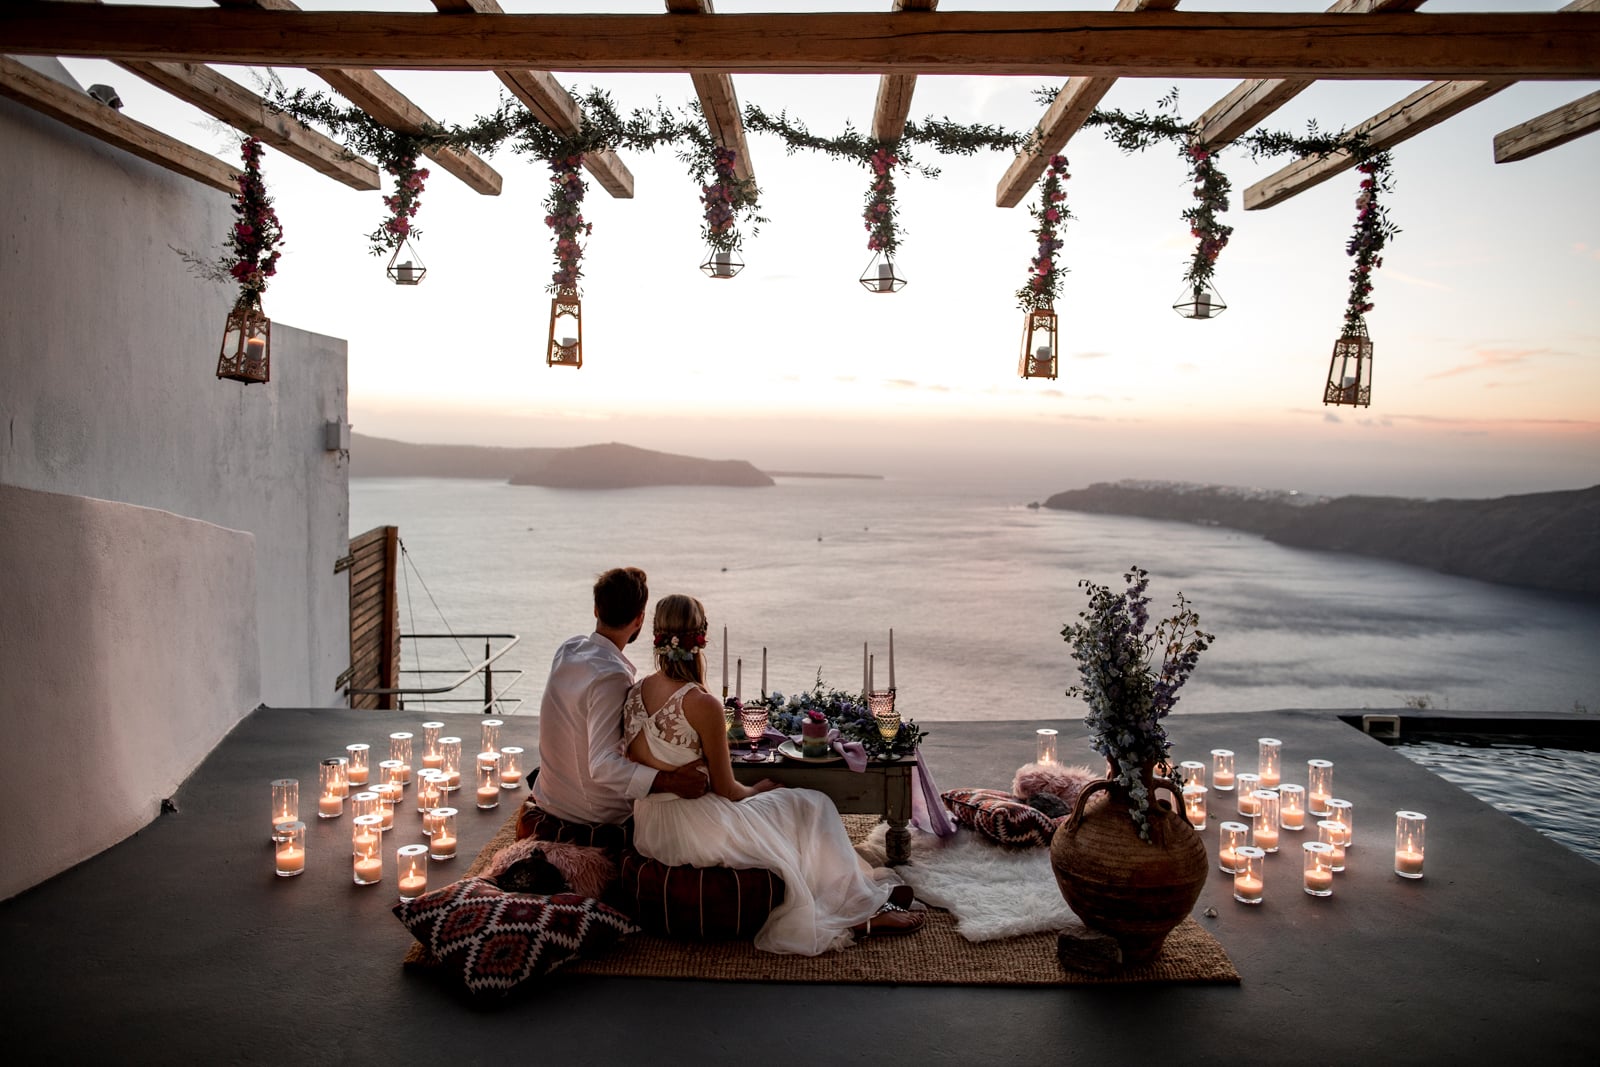 Bride and groom watch the sunset over the ocean from their private balcony intimate reception